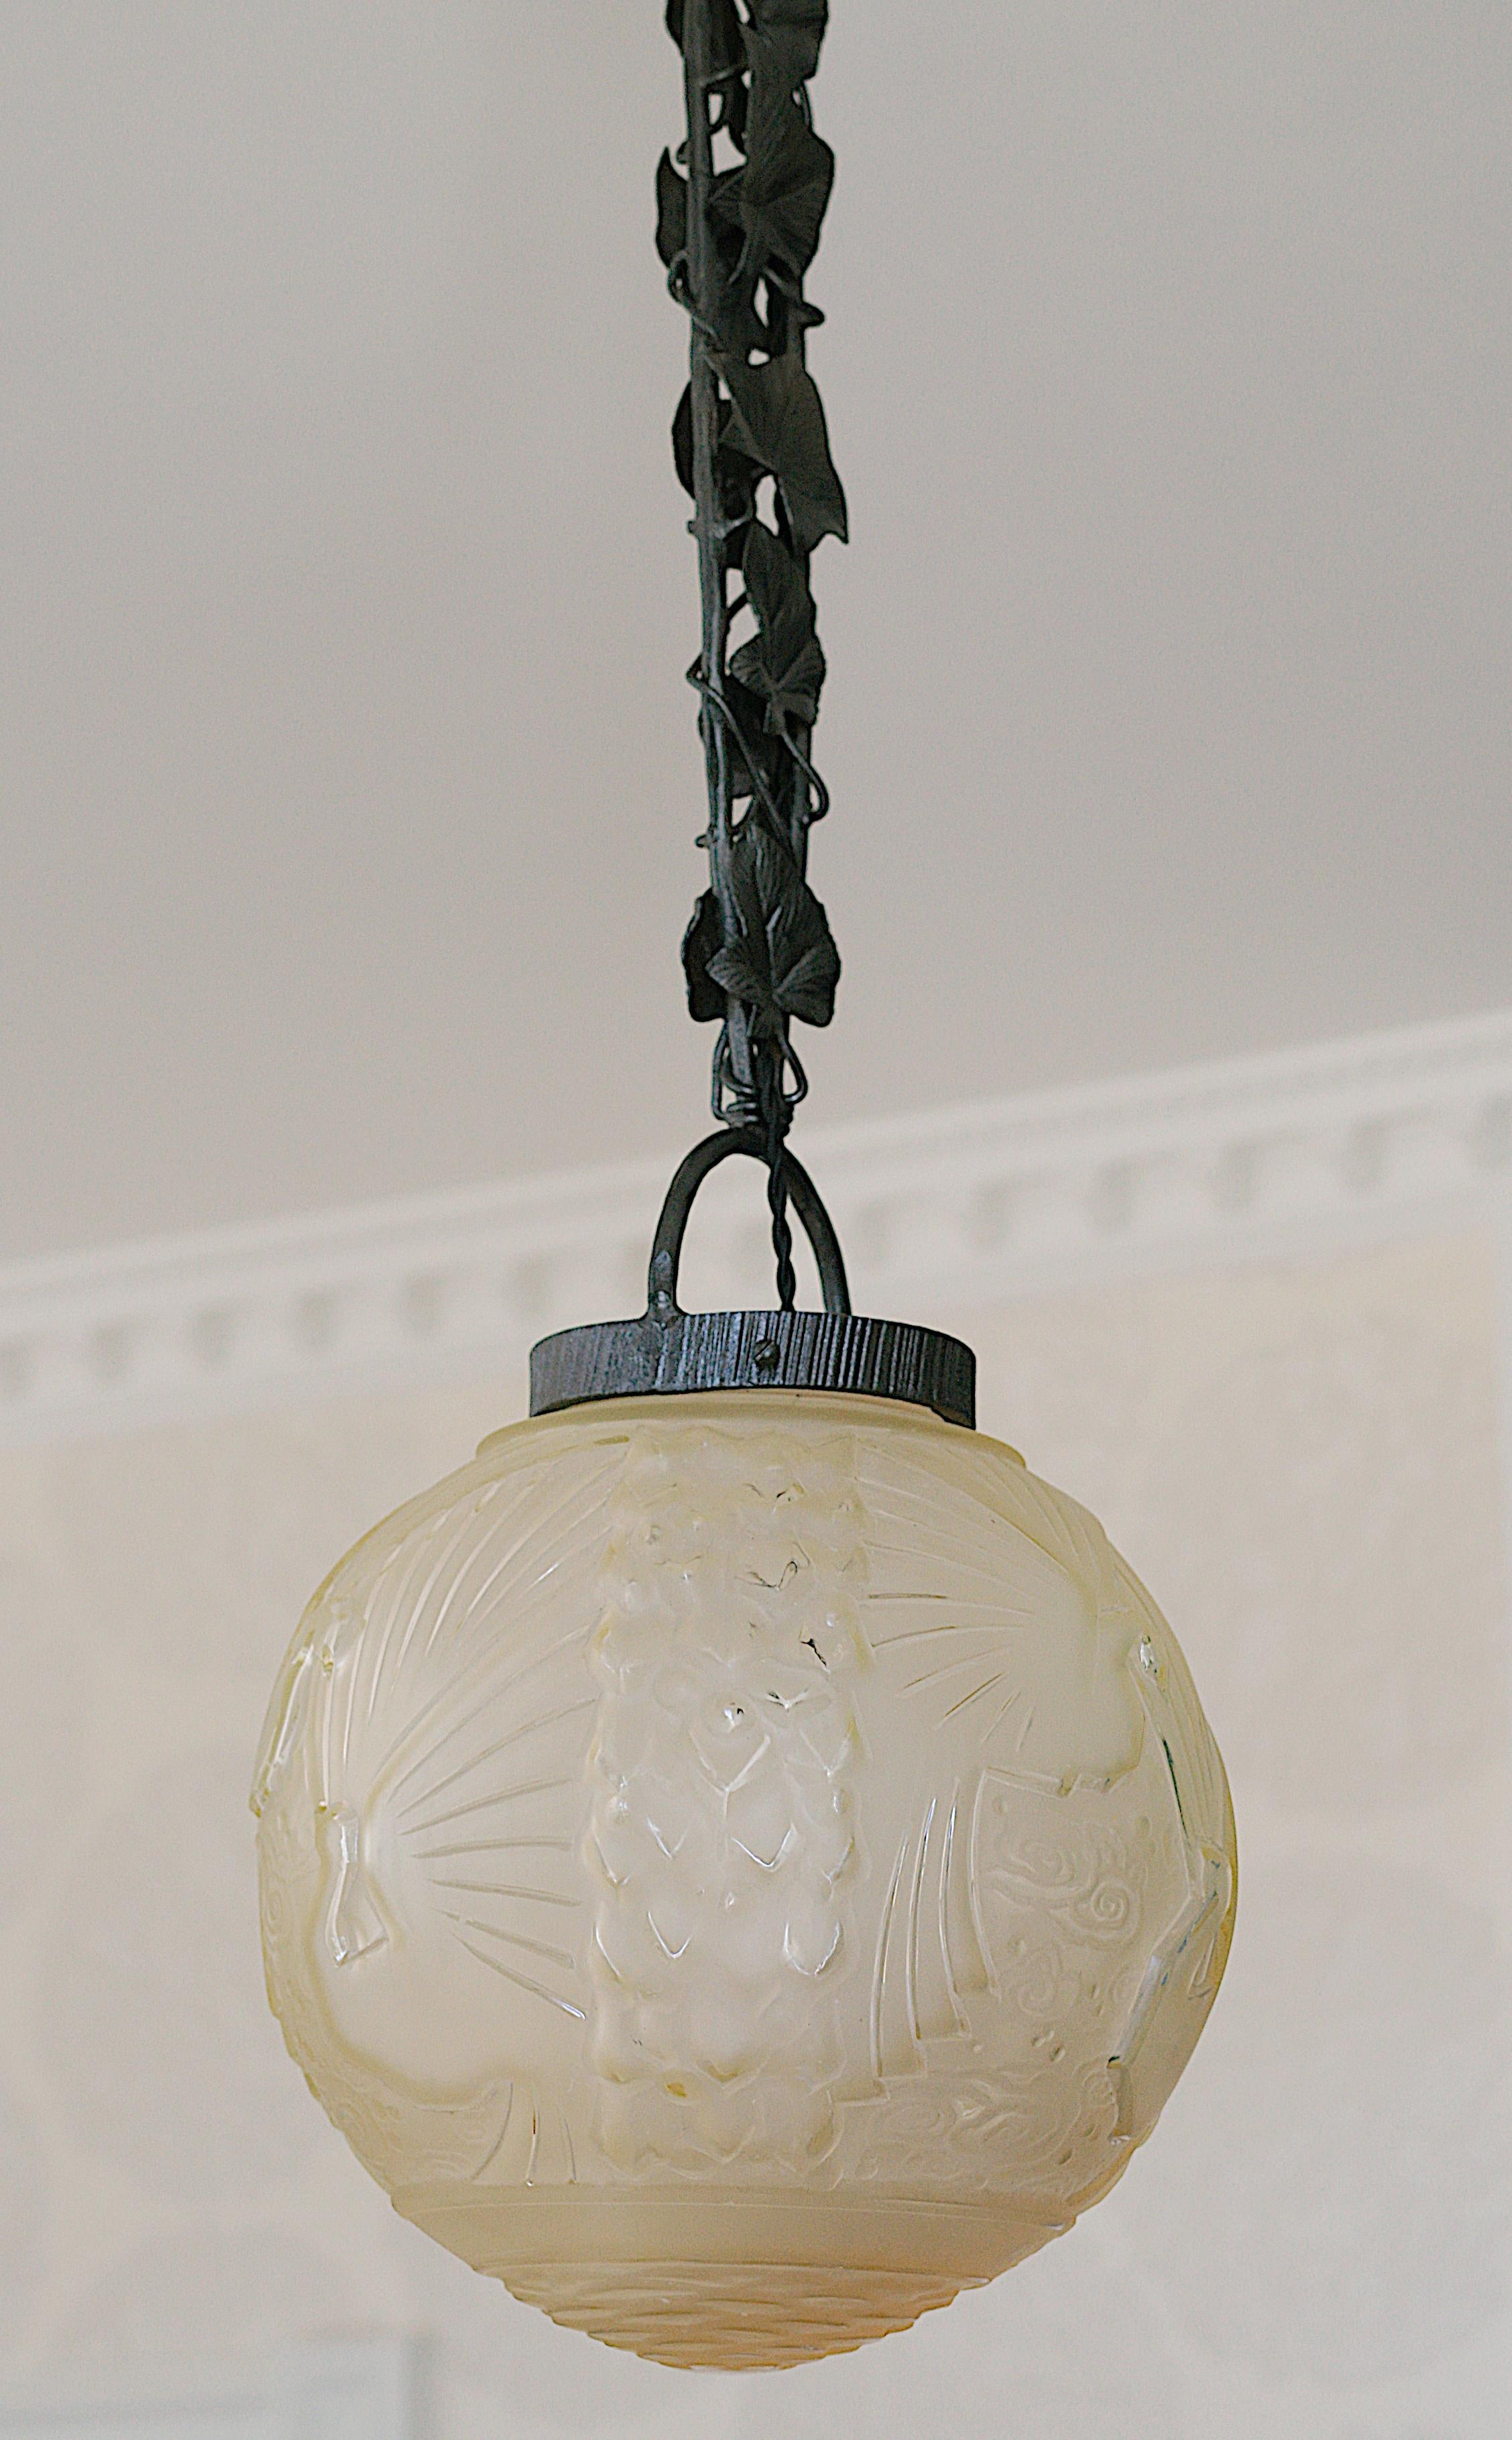 French Art Deco ceiling-light by Muller Frères (Luneville), France, ca.1925. Thick and large frosted glass shade with its wrought-iron ivy fixture. 6 paradise birds in the sky. Slightly beige or pink depending on the light. Measures: Height :